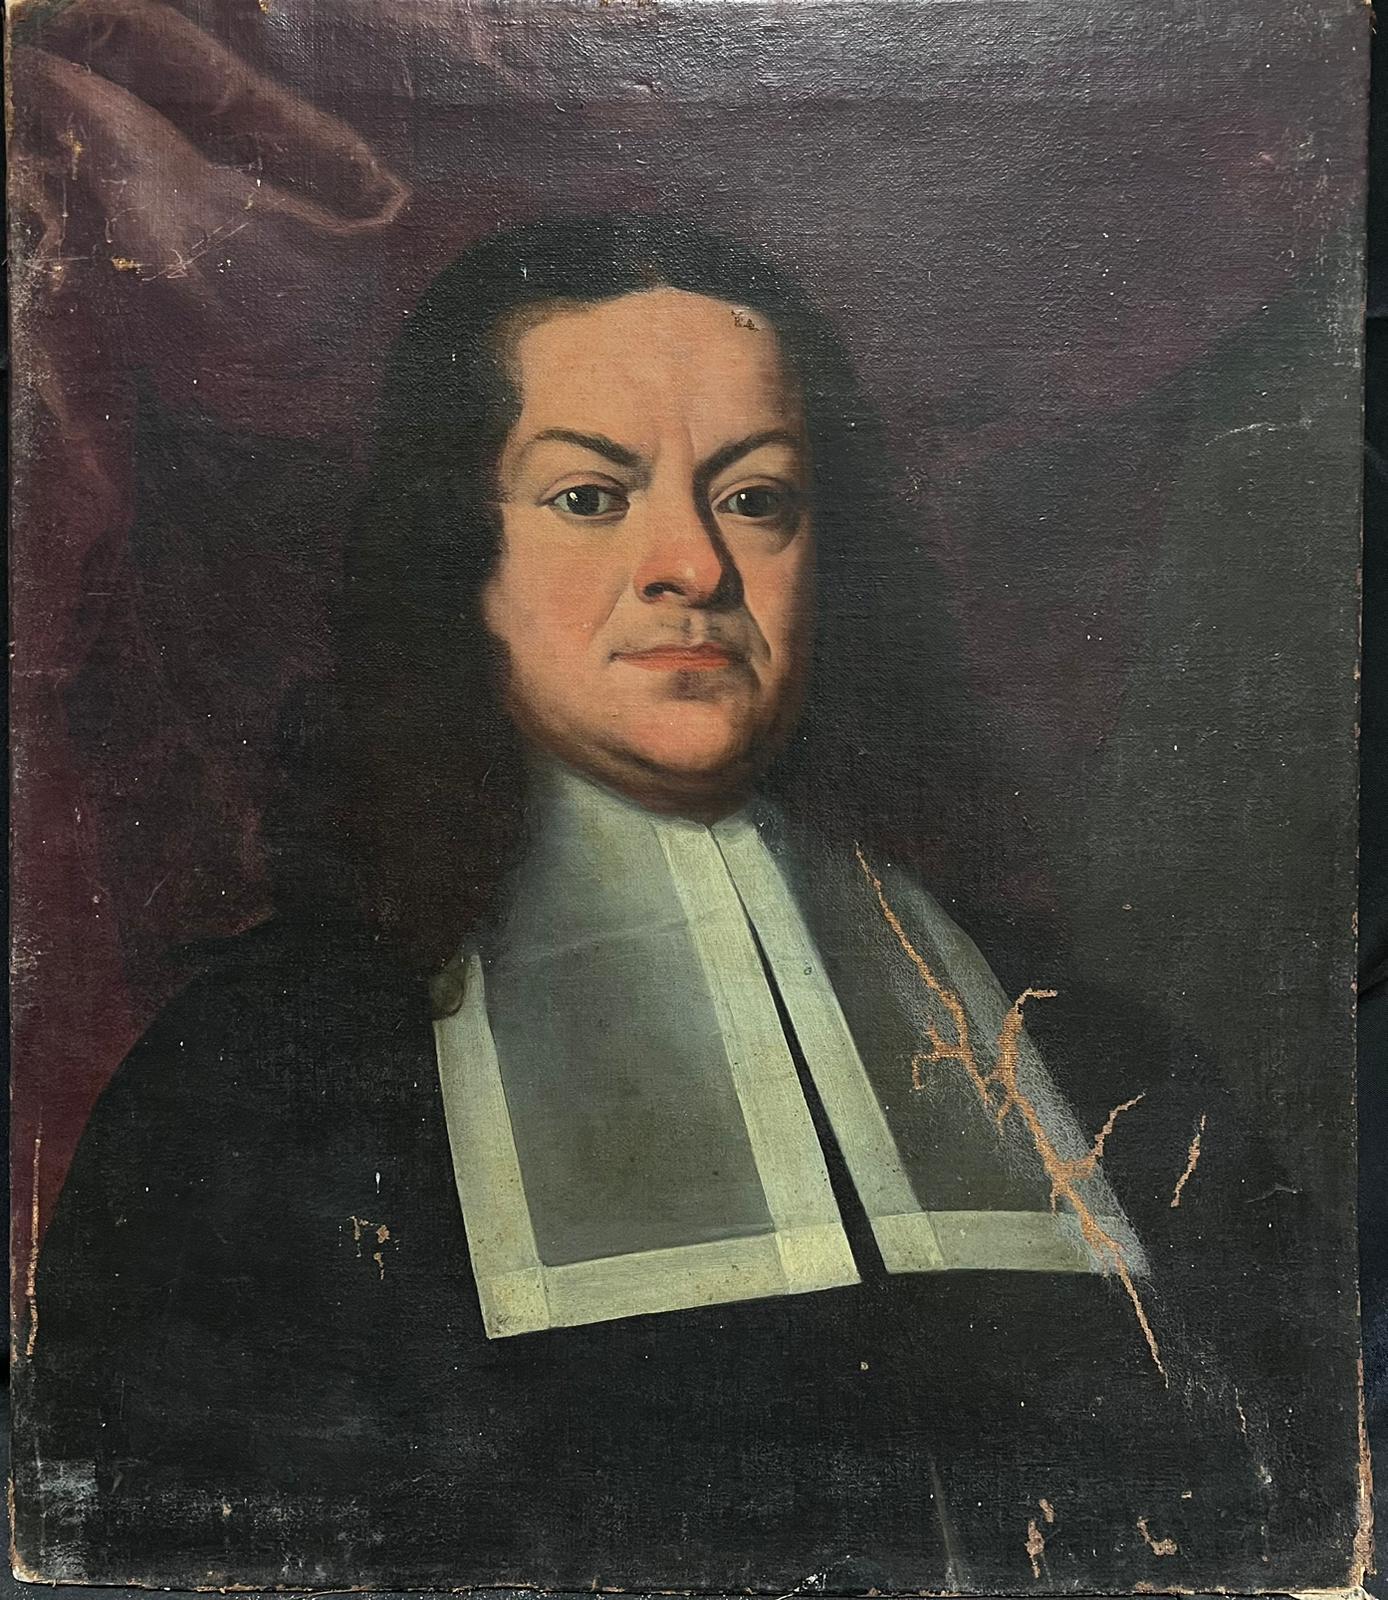 Large 1700's Italian Oil Painting on Canvas Portrait of a Clerical Gentleman - Black Portrait Painting by Circle of Giovanni Battista Carboni (1725-1790)